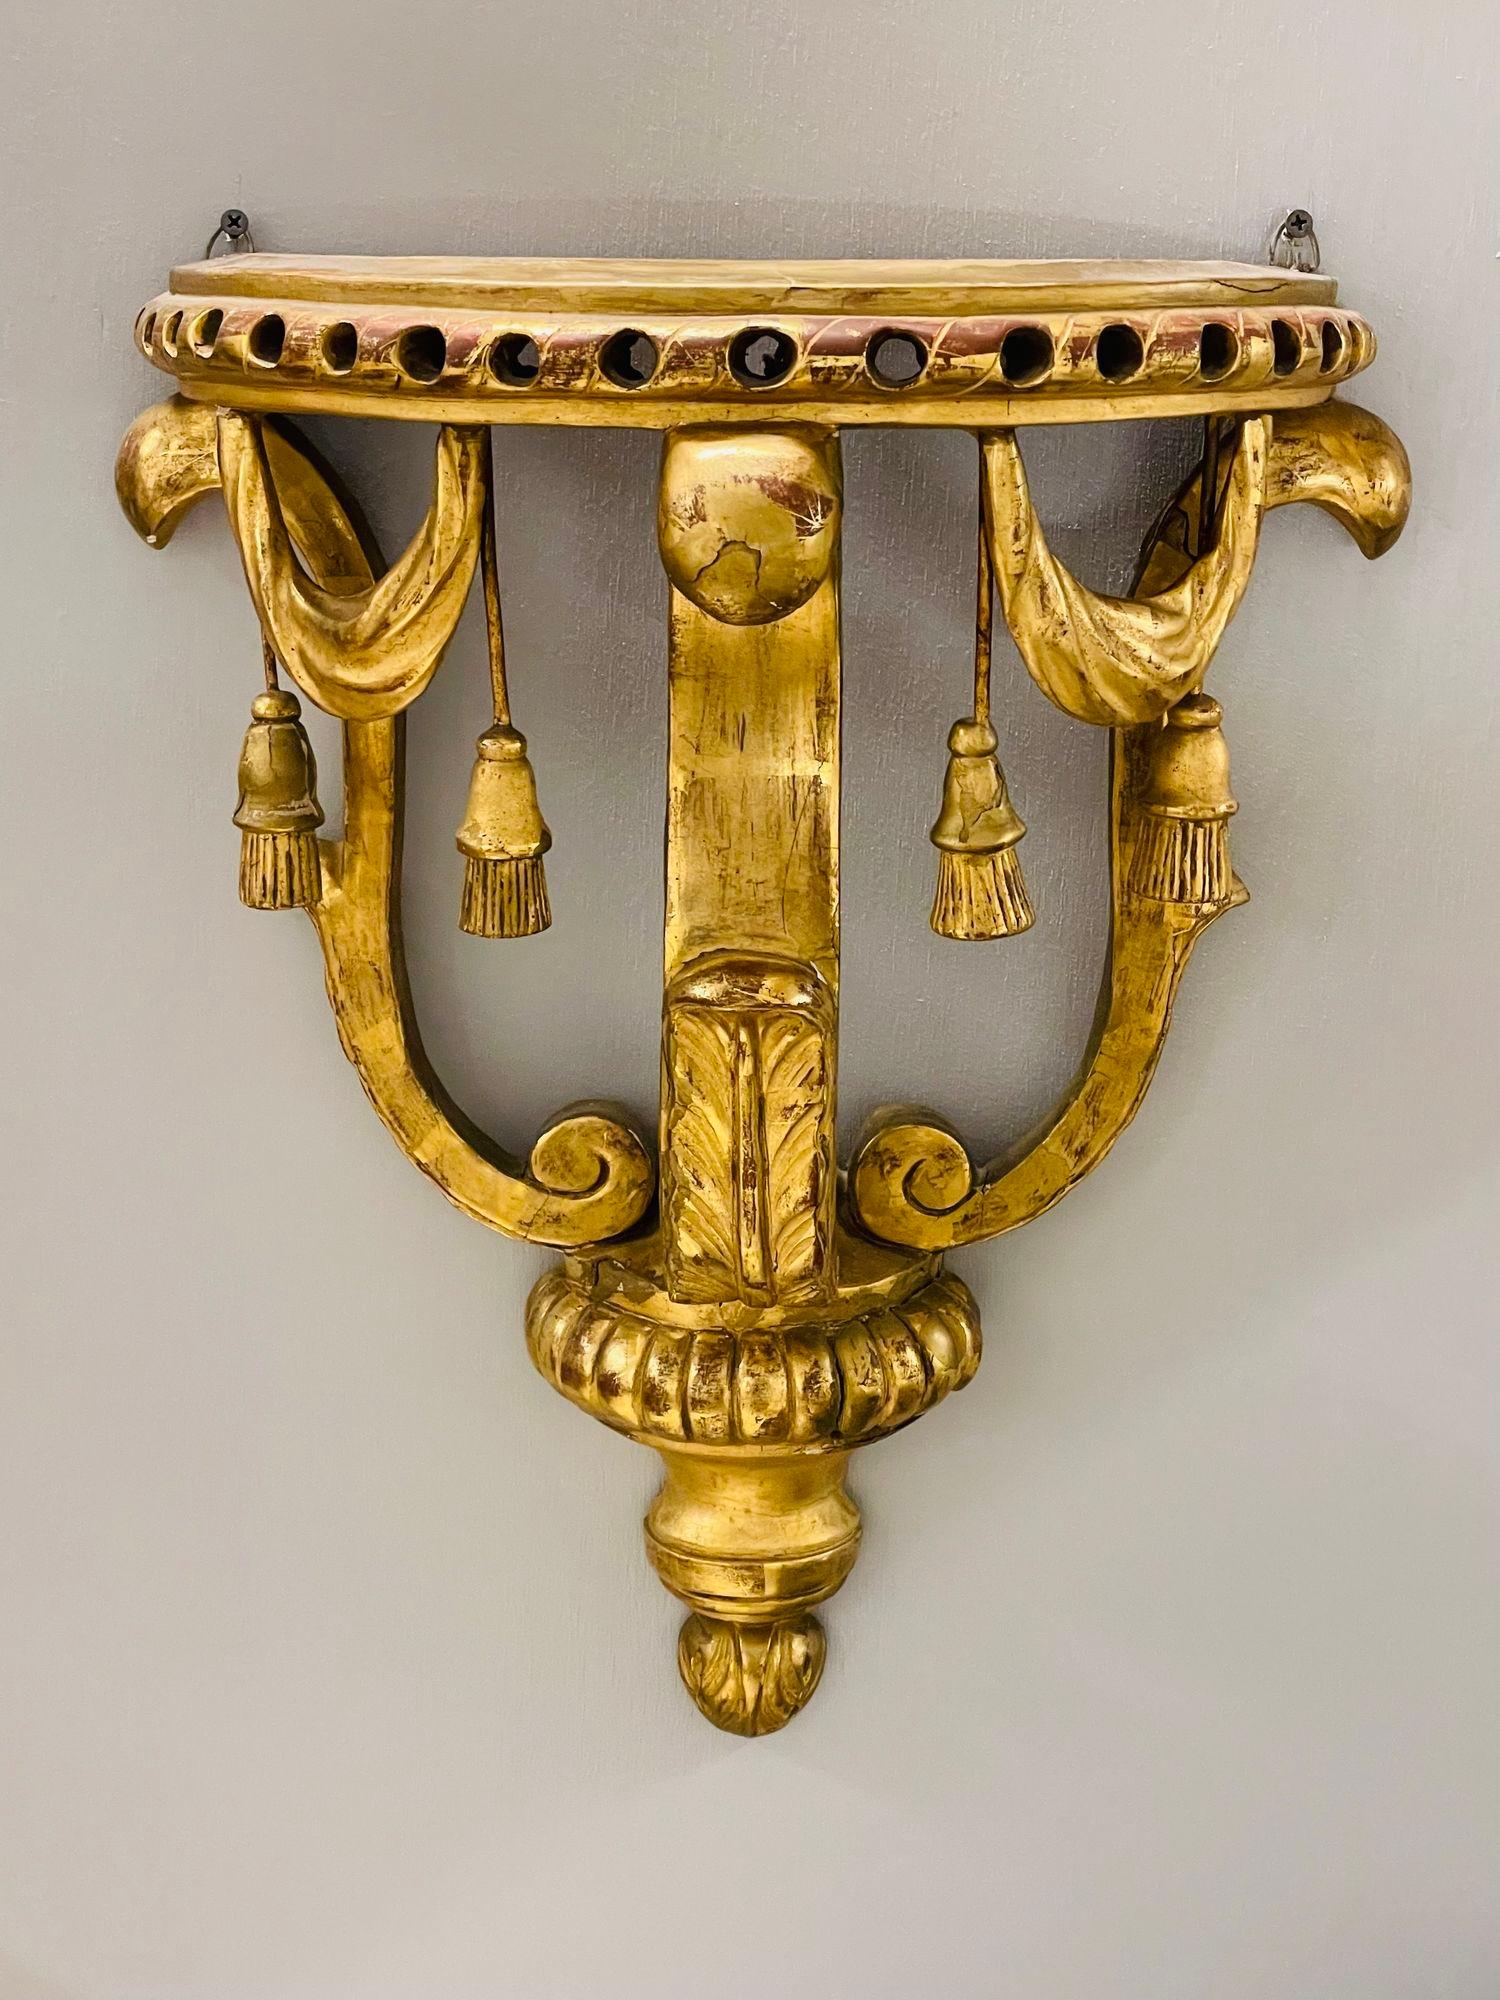 19th Century Gilt Wood Wall Bracket or Shelf, Water Gilt

A petite finest quality water gilt late 19th century wall braket having demi lune form with fine tassle and shell carvings. Strong and strudy in very nice original condition.

H21